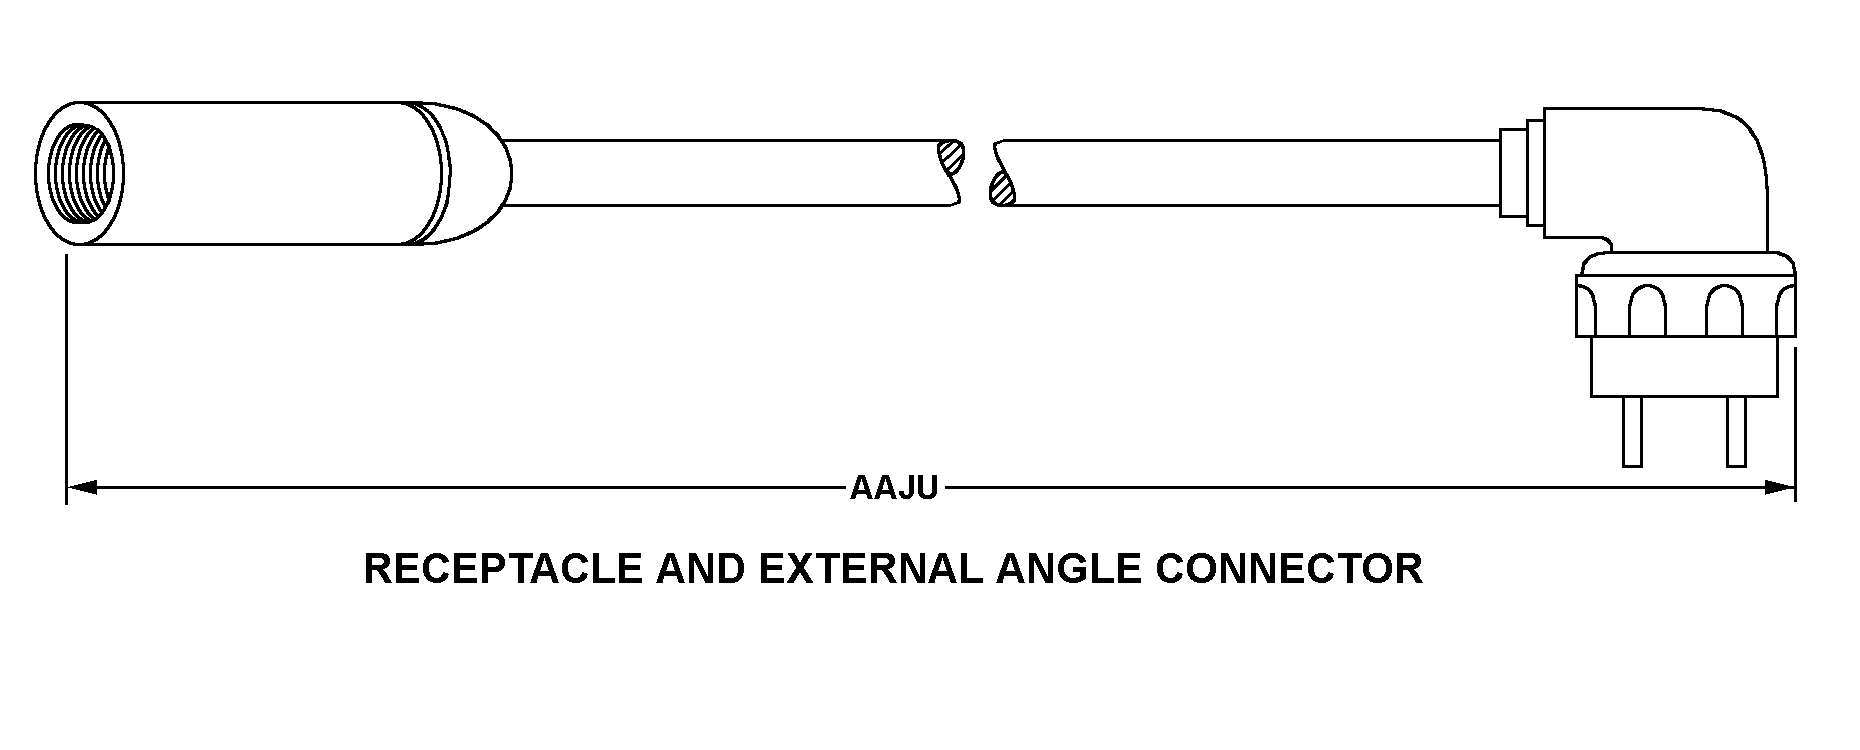 RECEPTACLE AND EXTERNAL ANGLE CONNECTOR style nsn 5995-01-041-9226